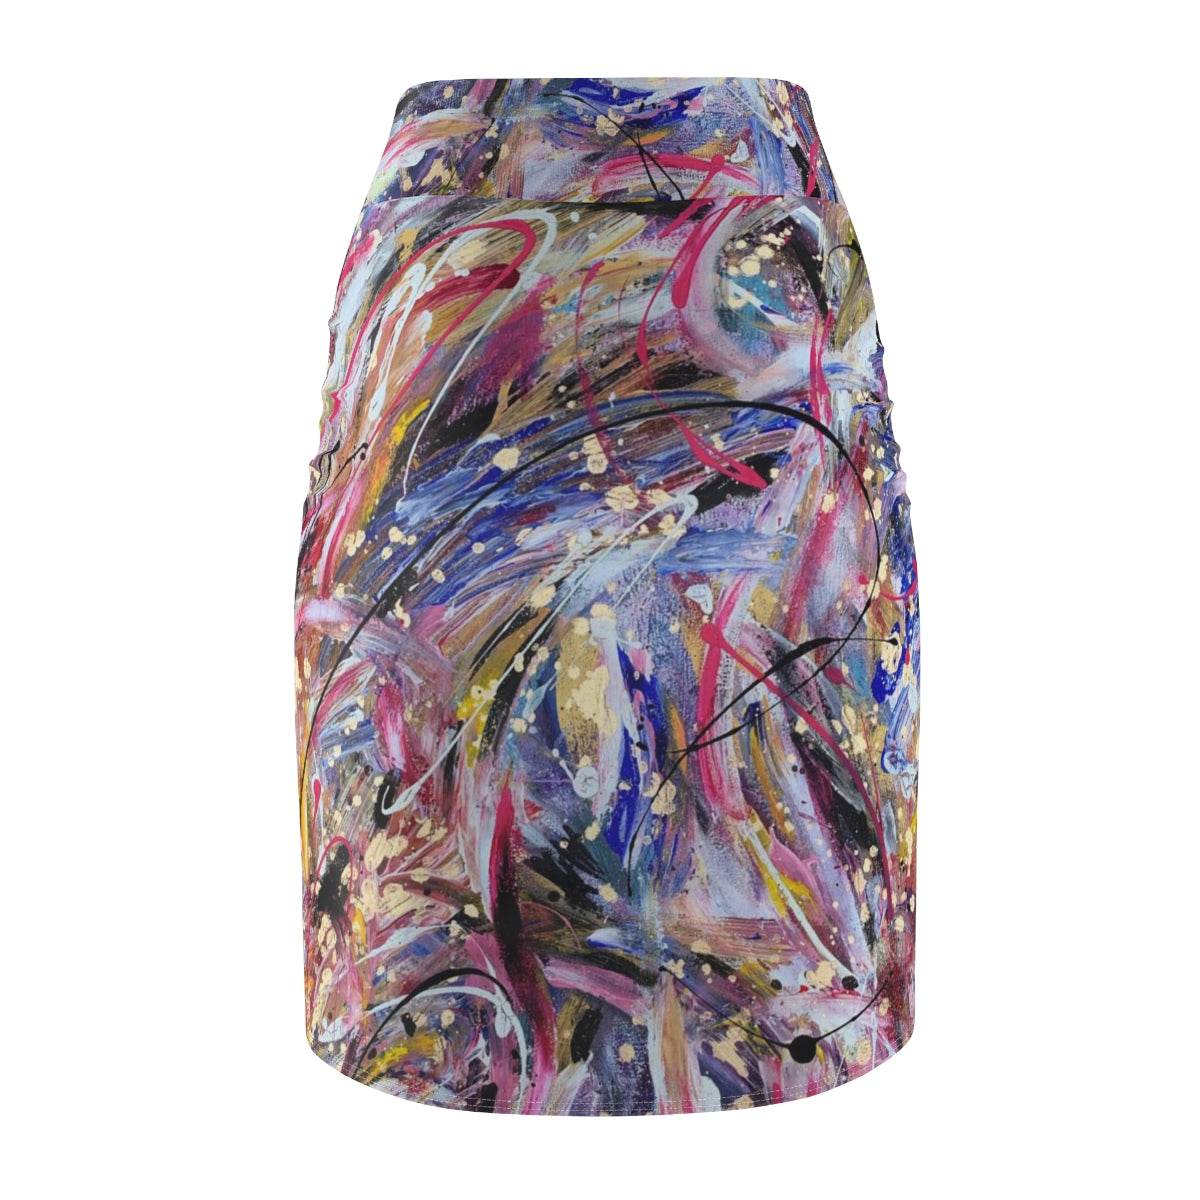 "Maybe Alchemy is a Bubbly Jumble" Women's Pencil Skirt